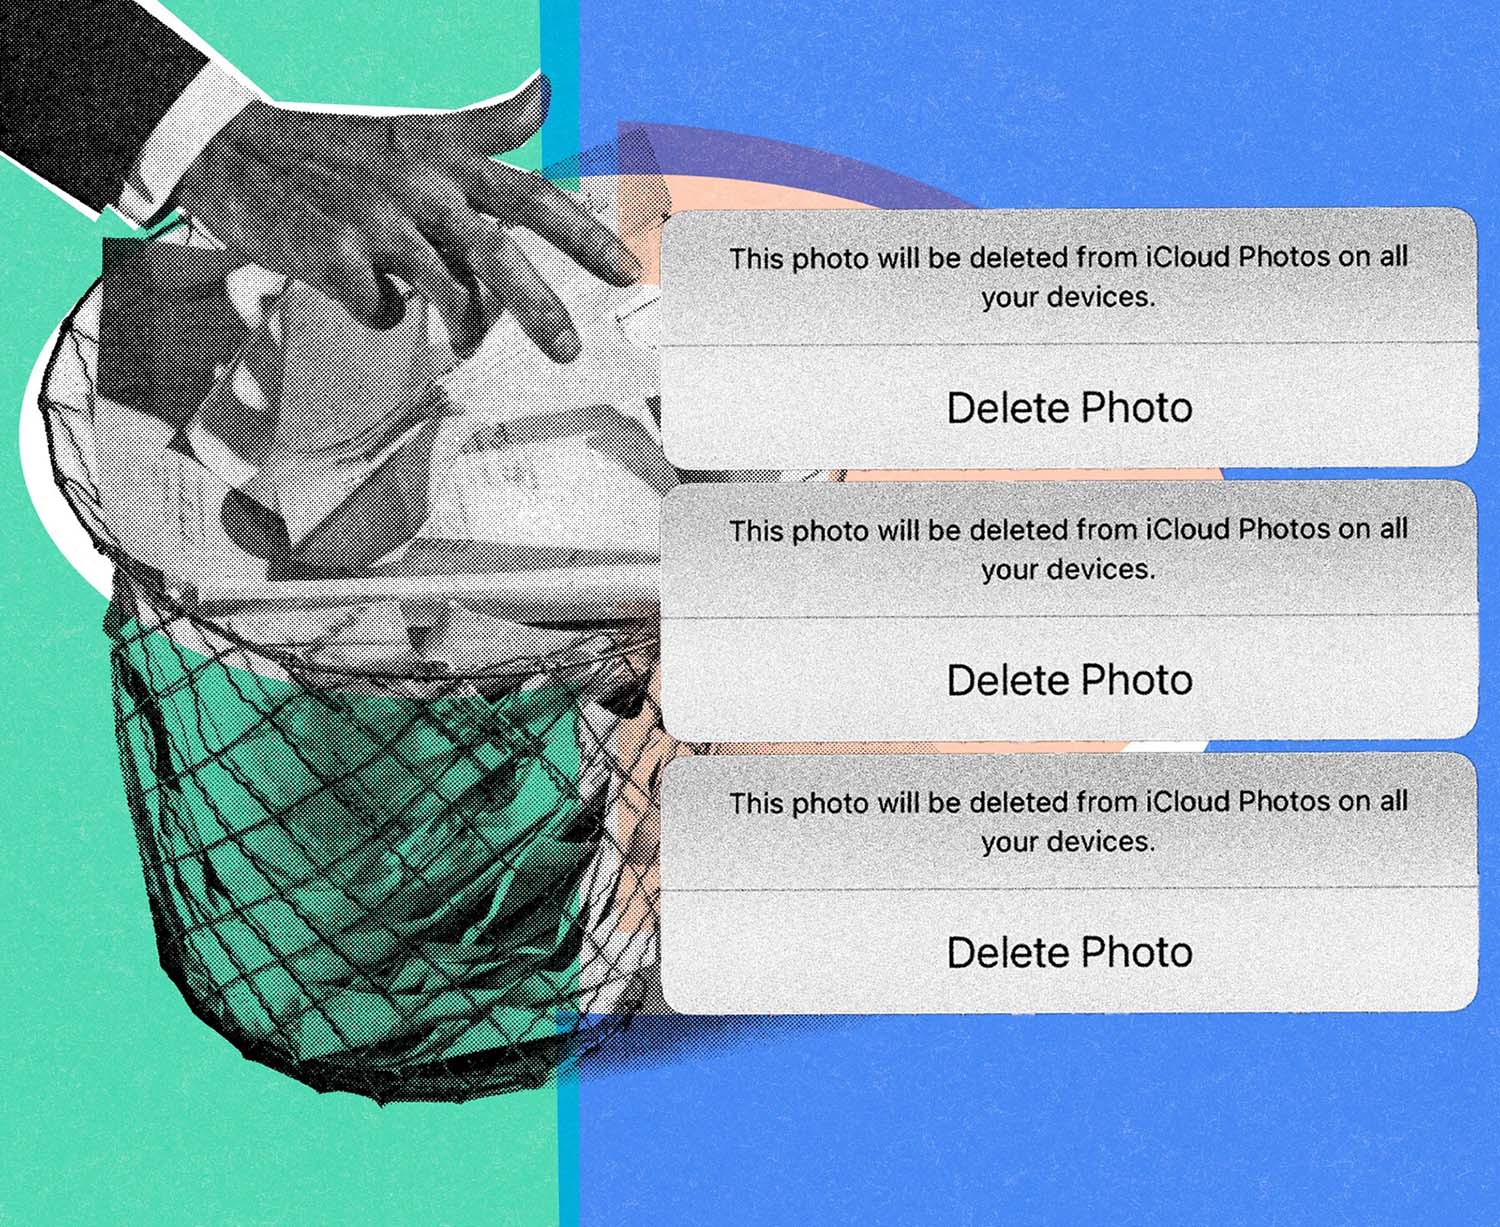 That's why long deleted photos can appear on iPhones